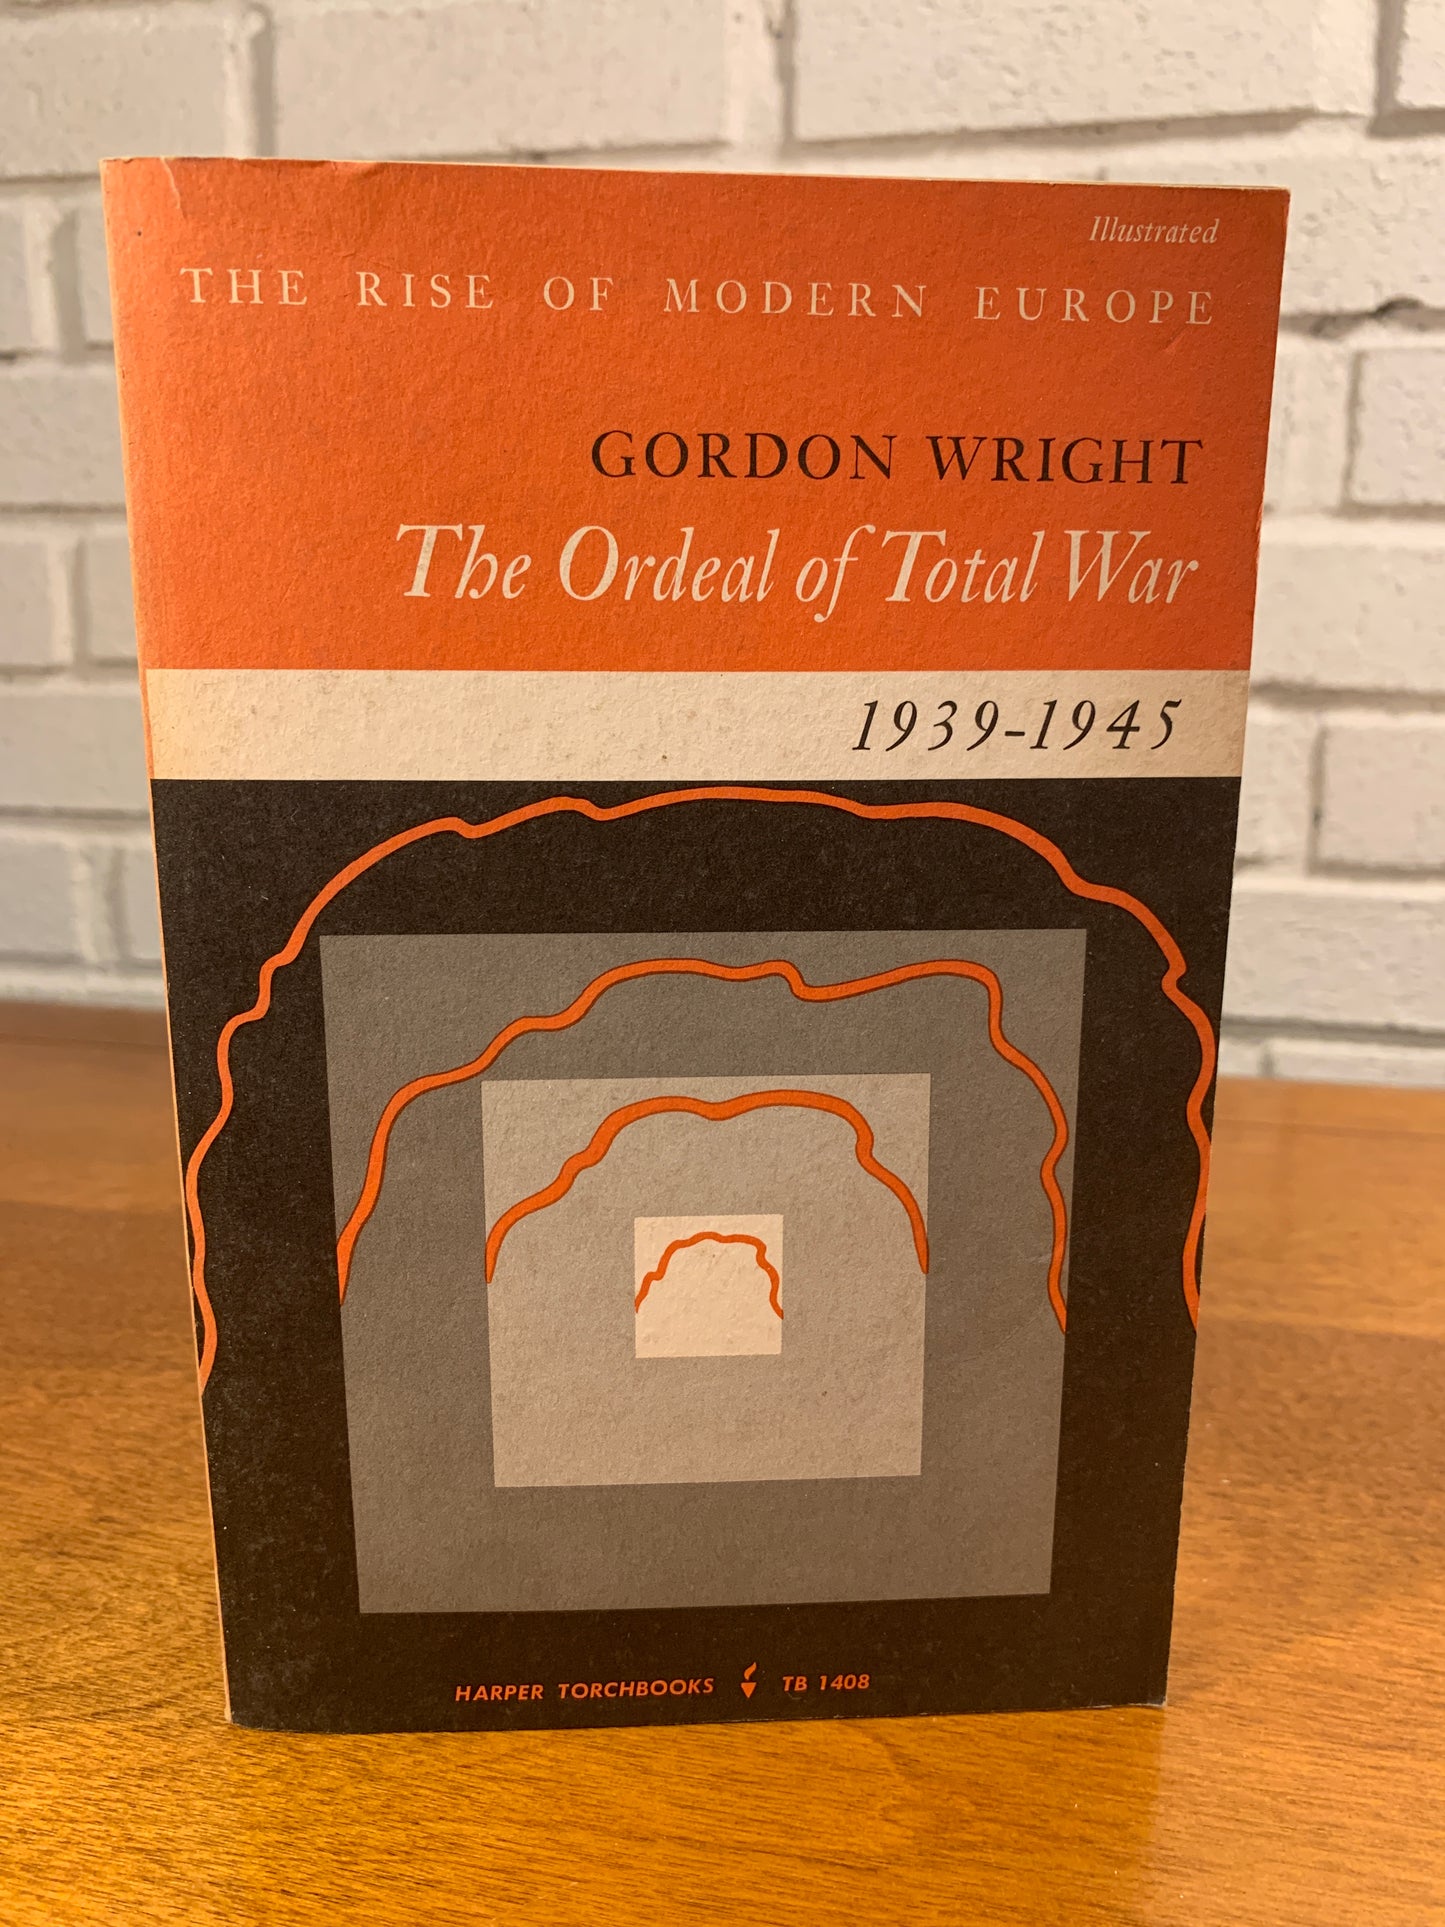 The Rise of Modern Europe, The Ordeal of Total War 1939-1945 by Gordon Wright